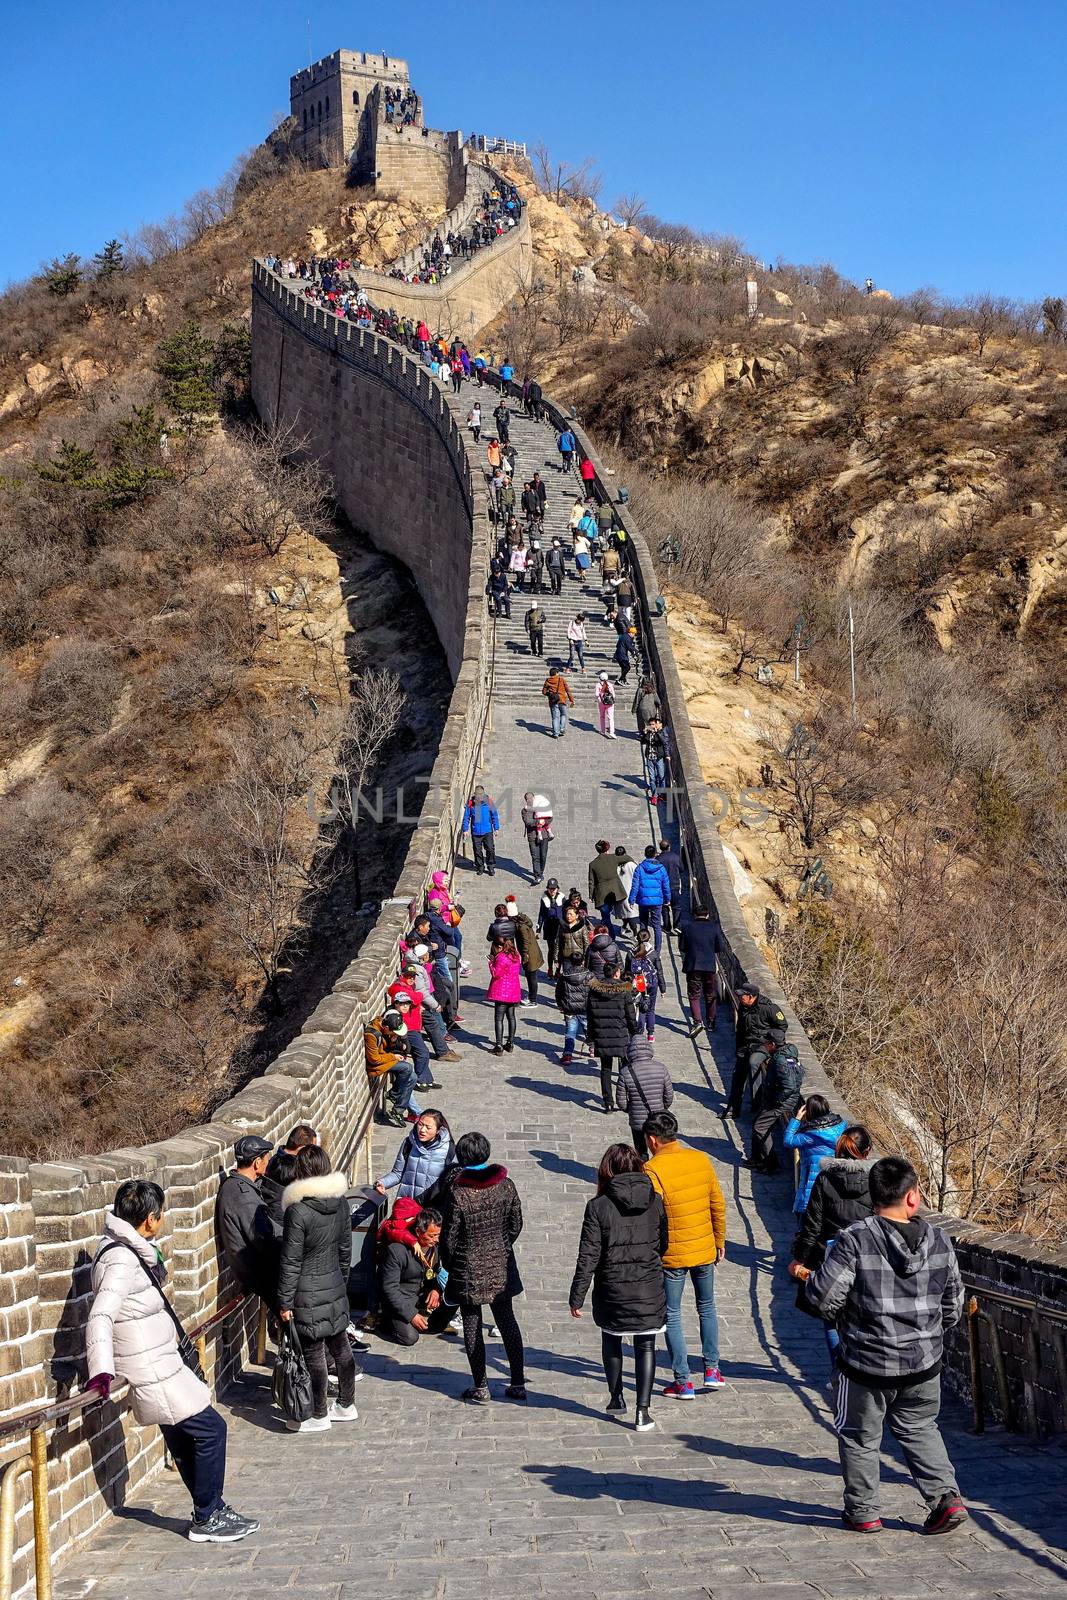 Great Wall of China. Tourists visiting the Great Wall of China near Beijing. by askoldsb